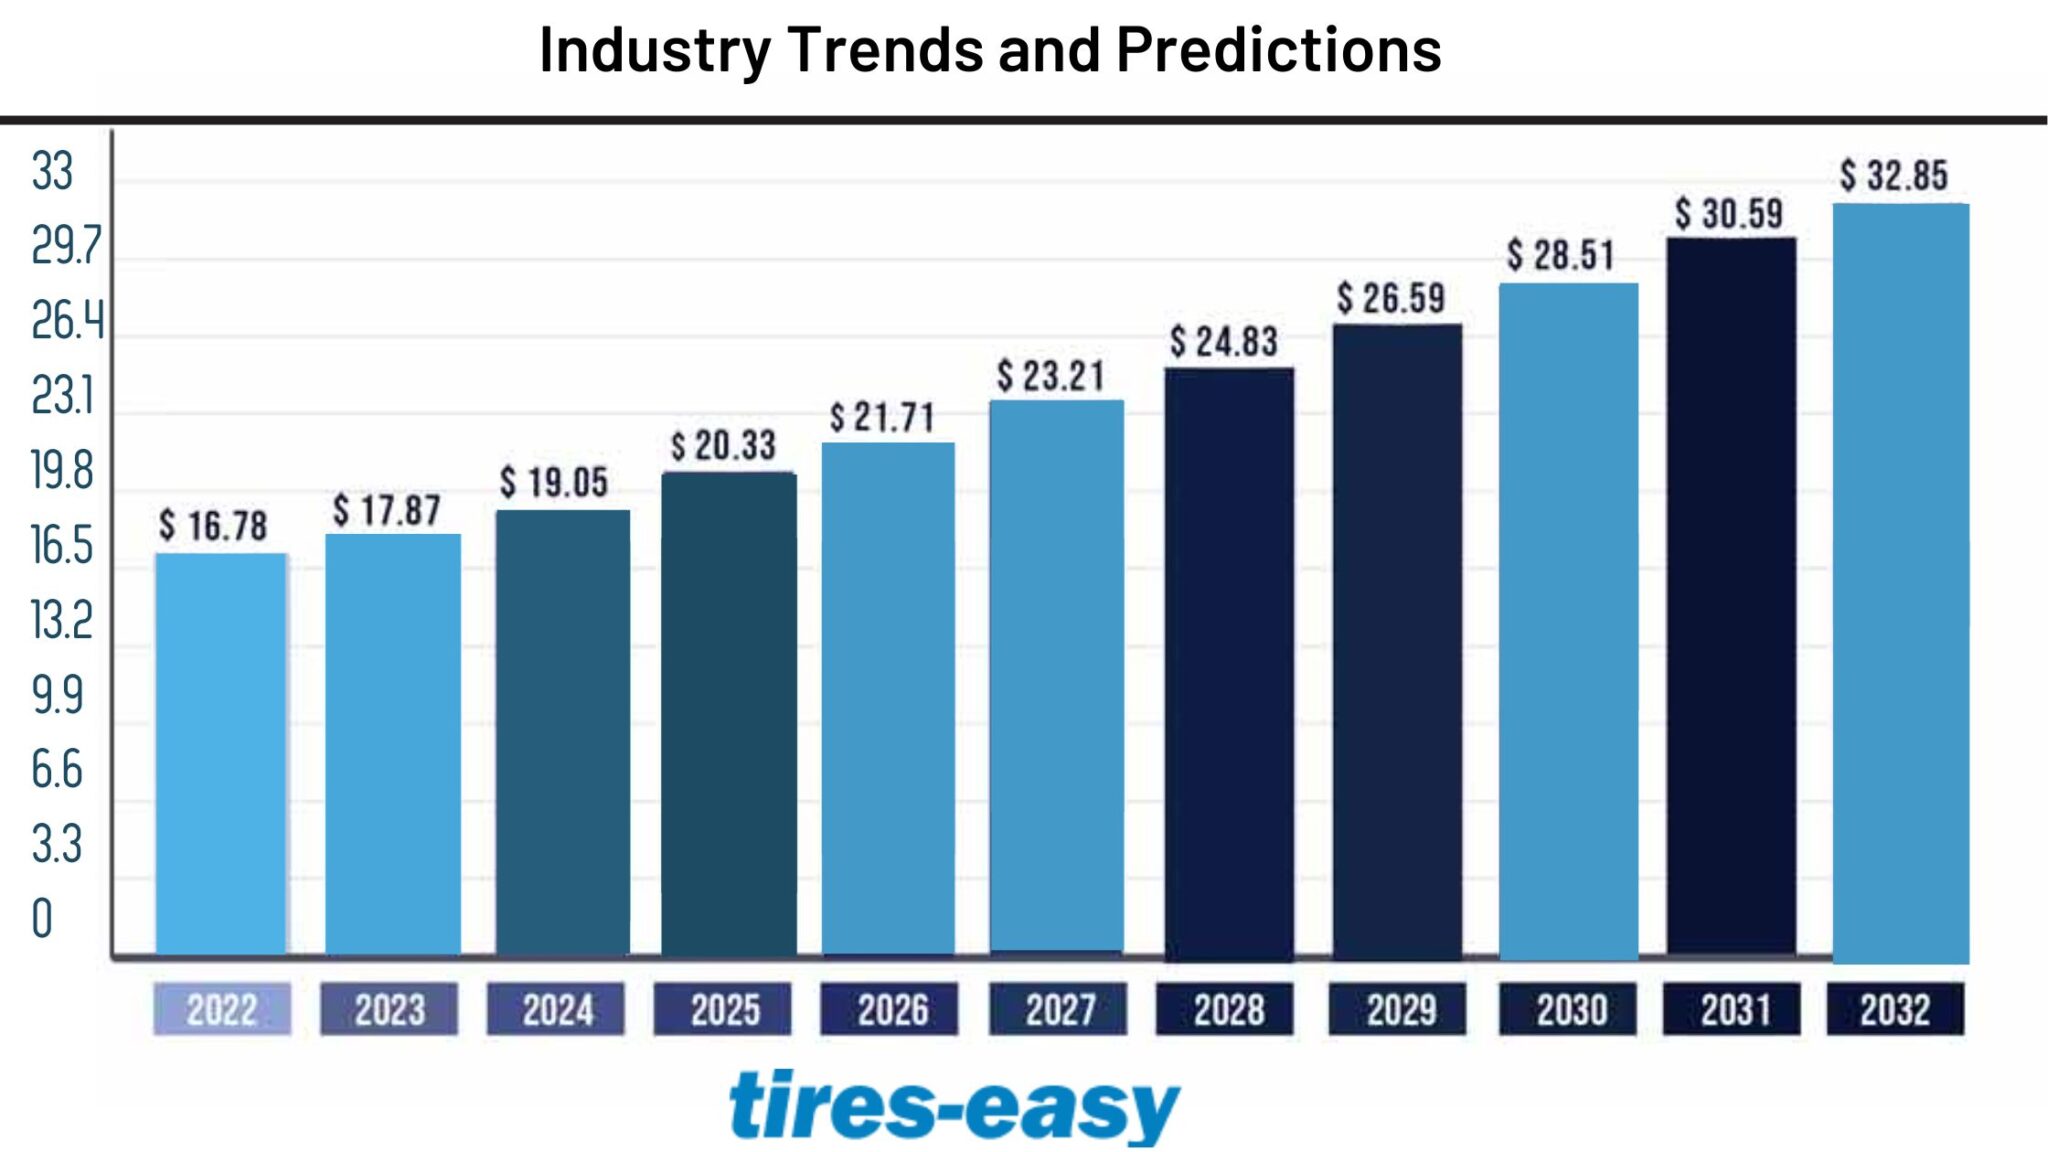 Industry Trends and Predictions - run flat tires